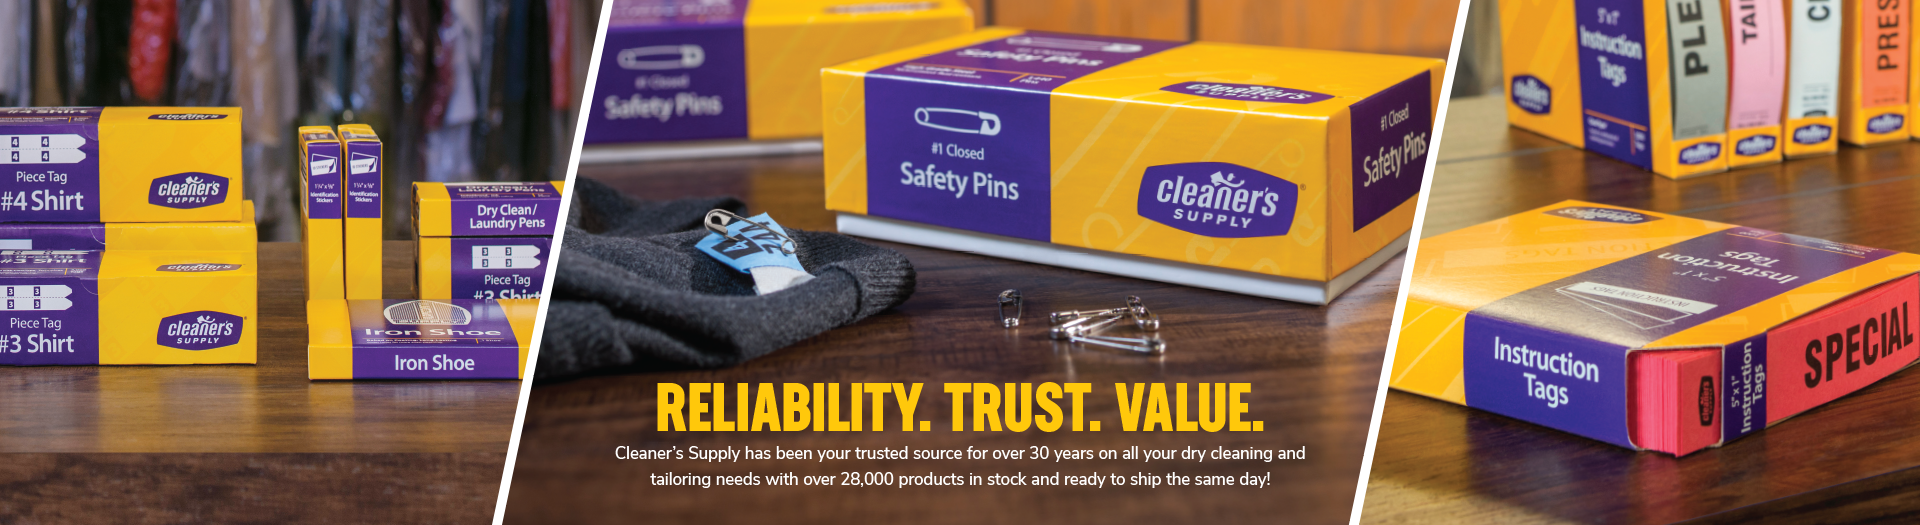 Reliability. Trust. Value. Cleaner's Supply has been your trusted source for over 30 years on all your dry cleaning and tailoring needs with over 28,000 products in stock and ready to ship the same day!